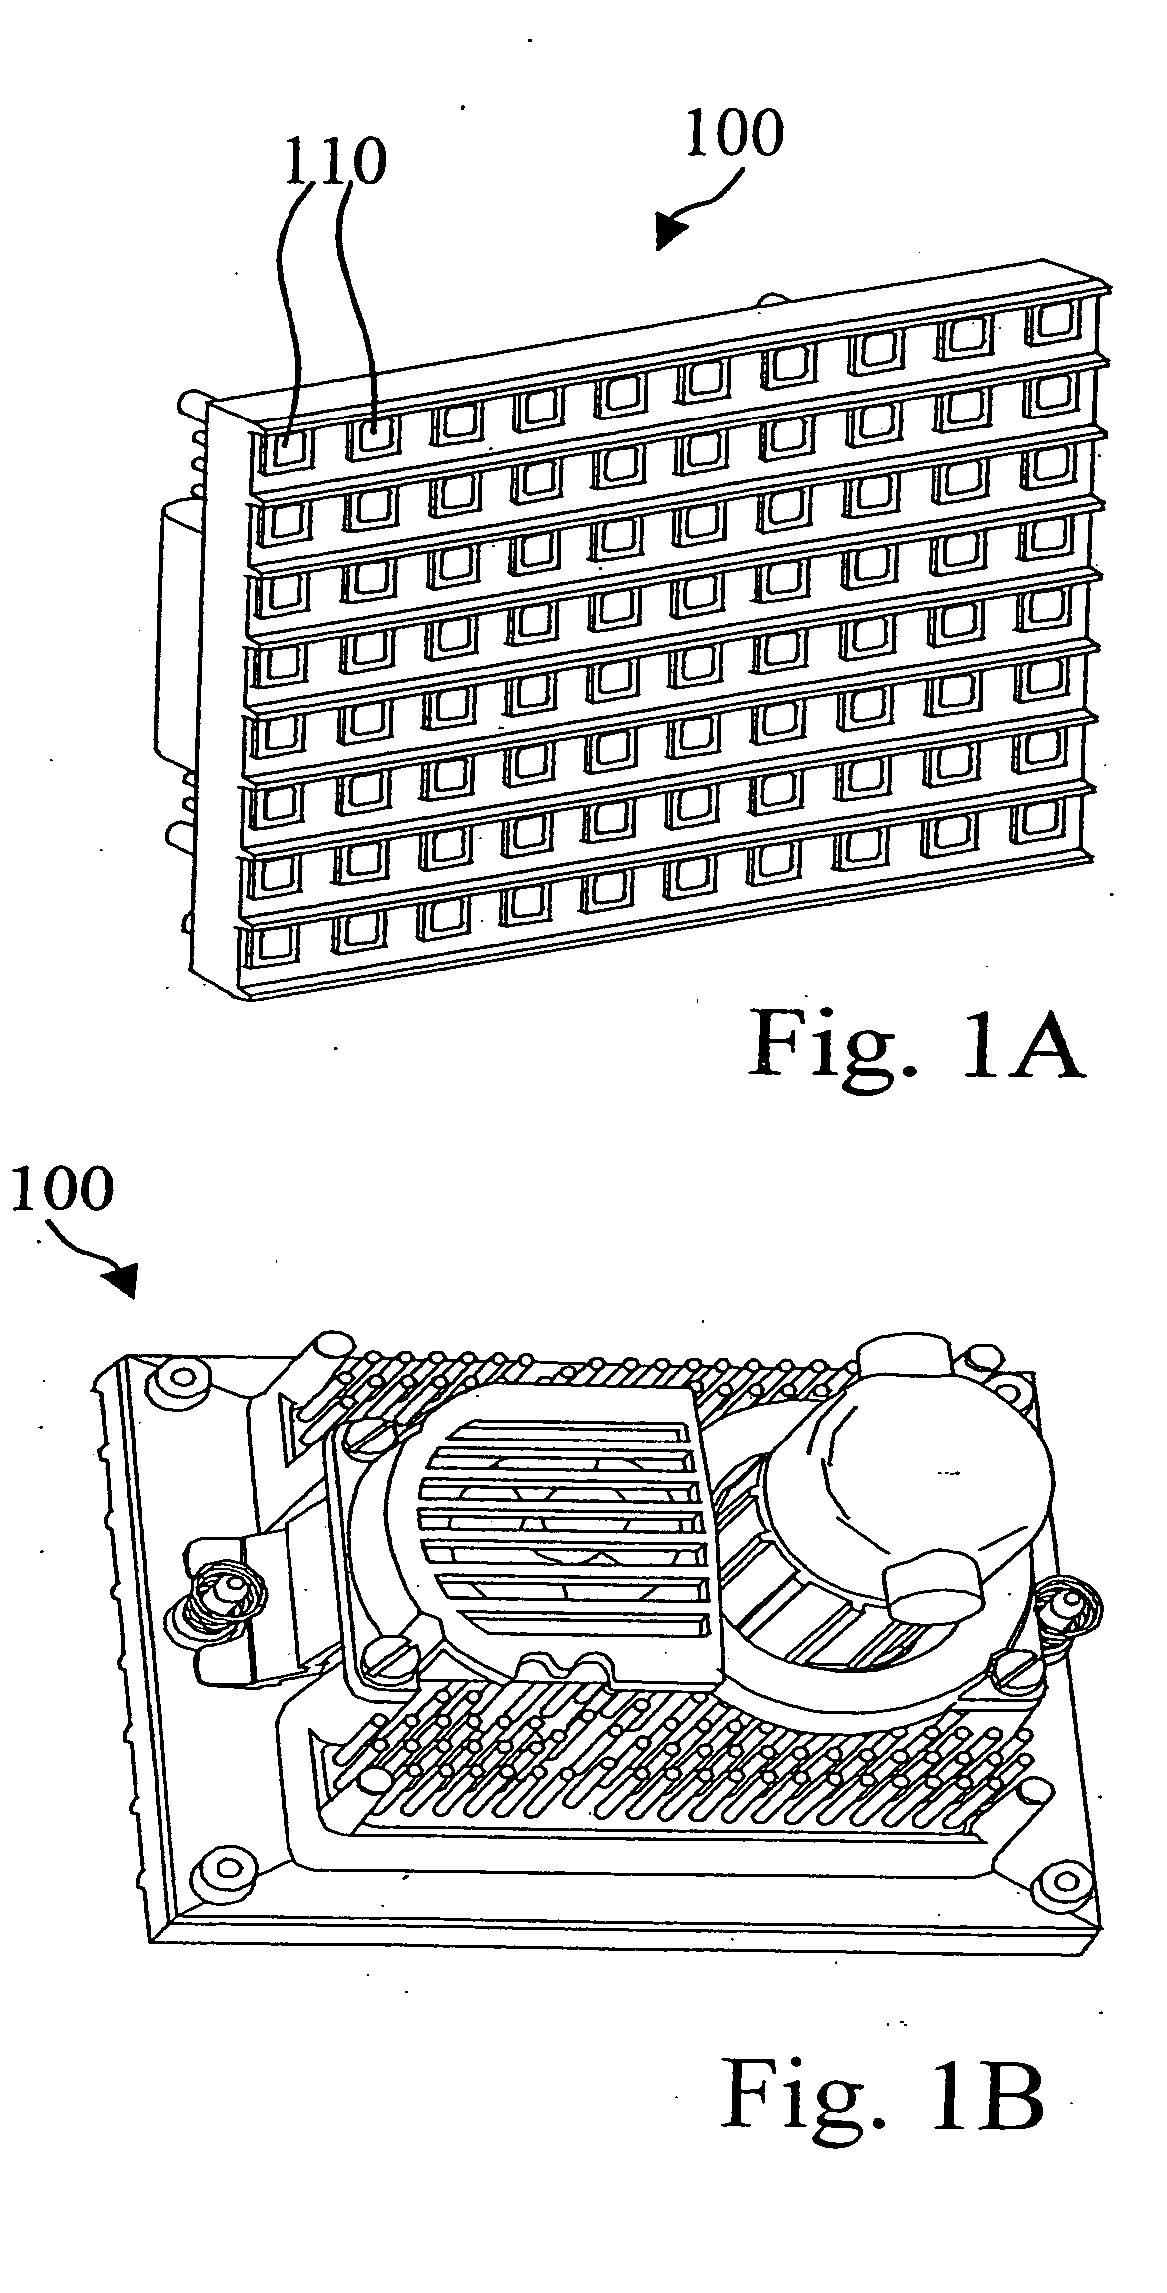 Display element and mechanical mounting interface used therein